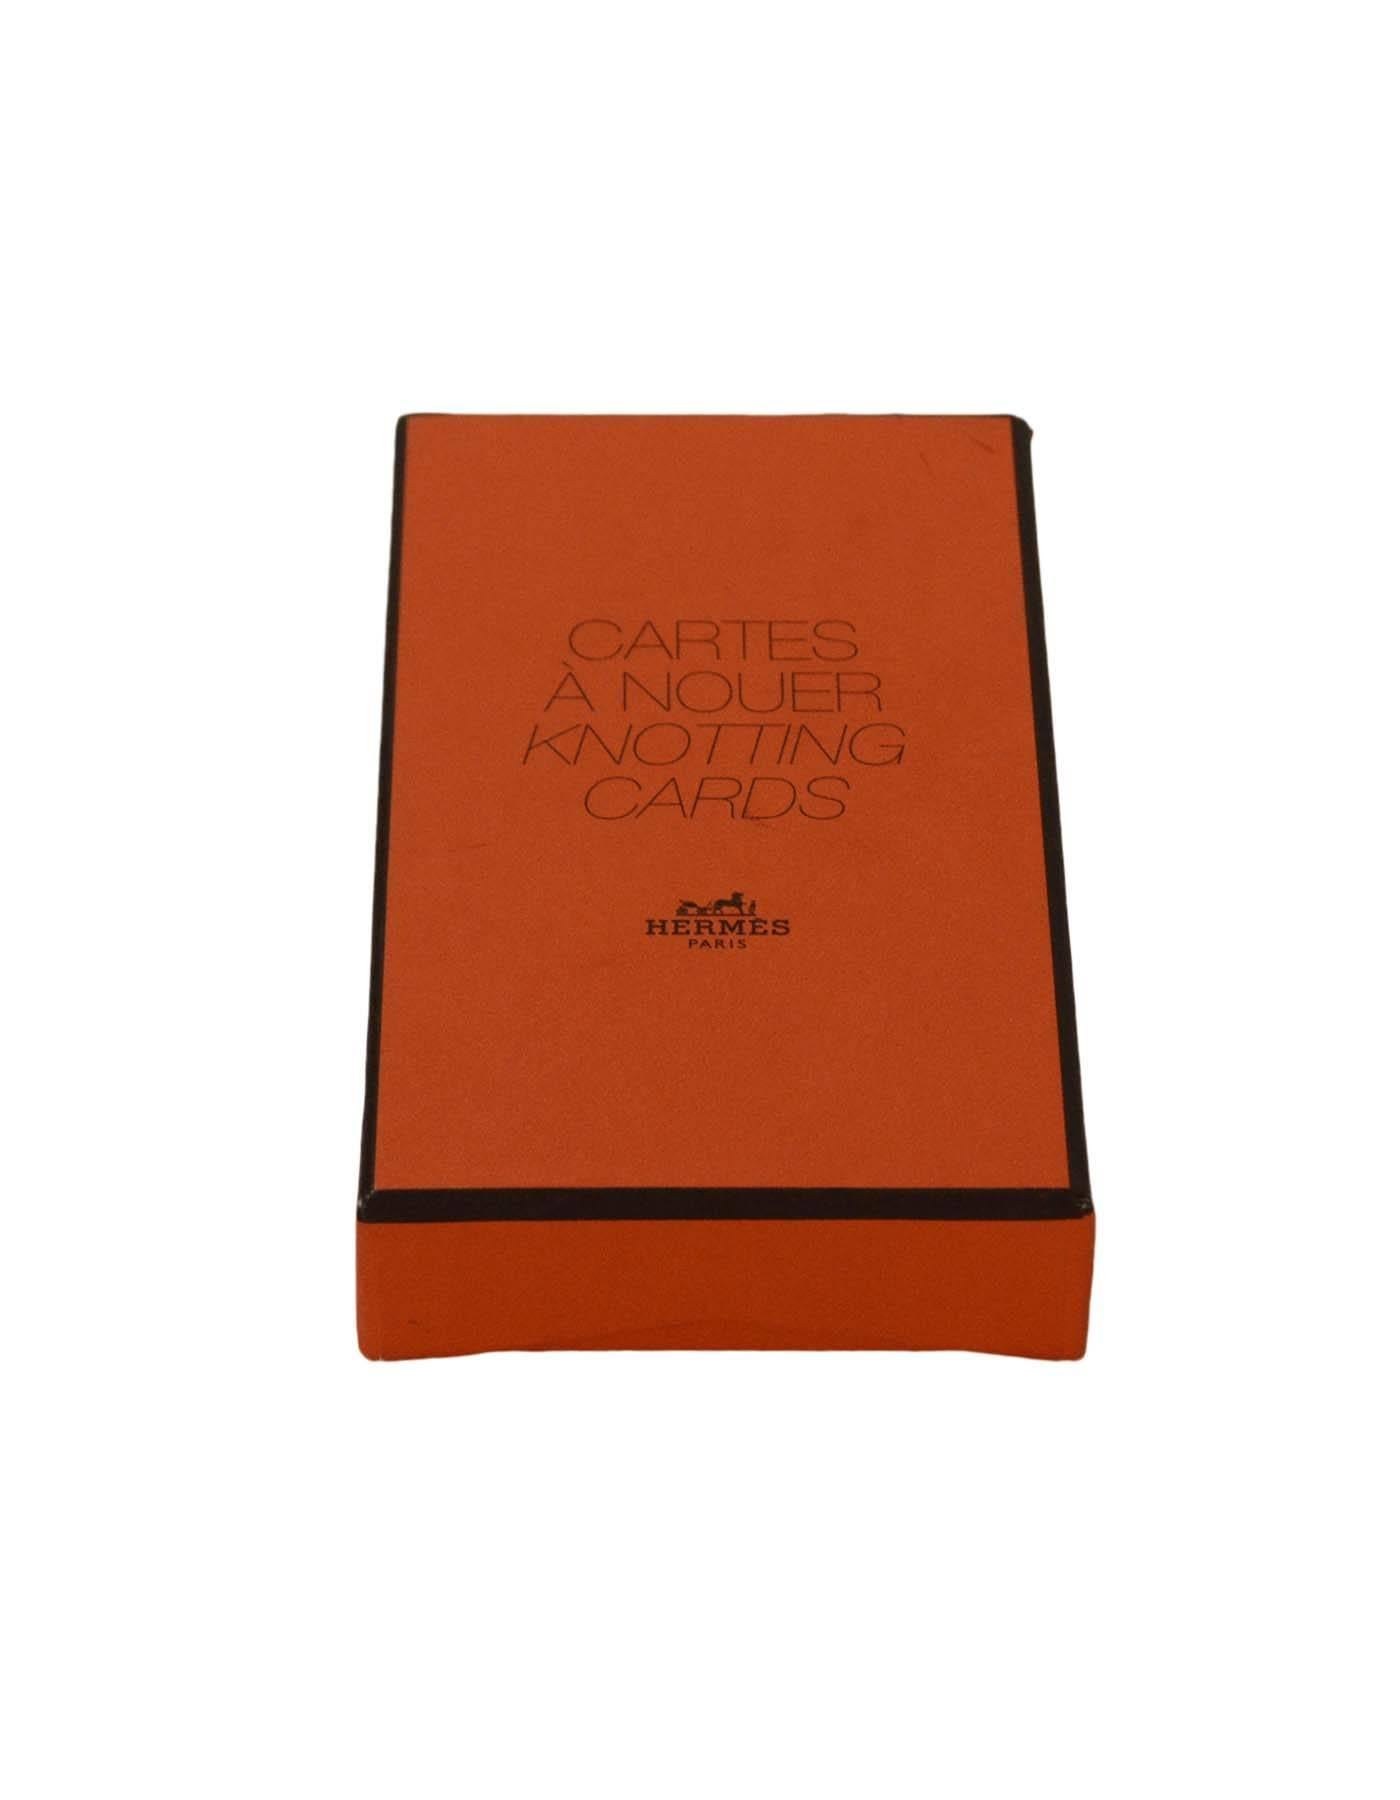 hermes knotting cards price